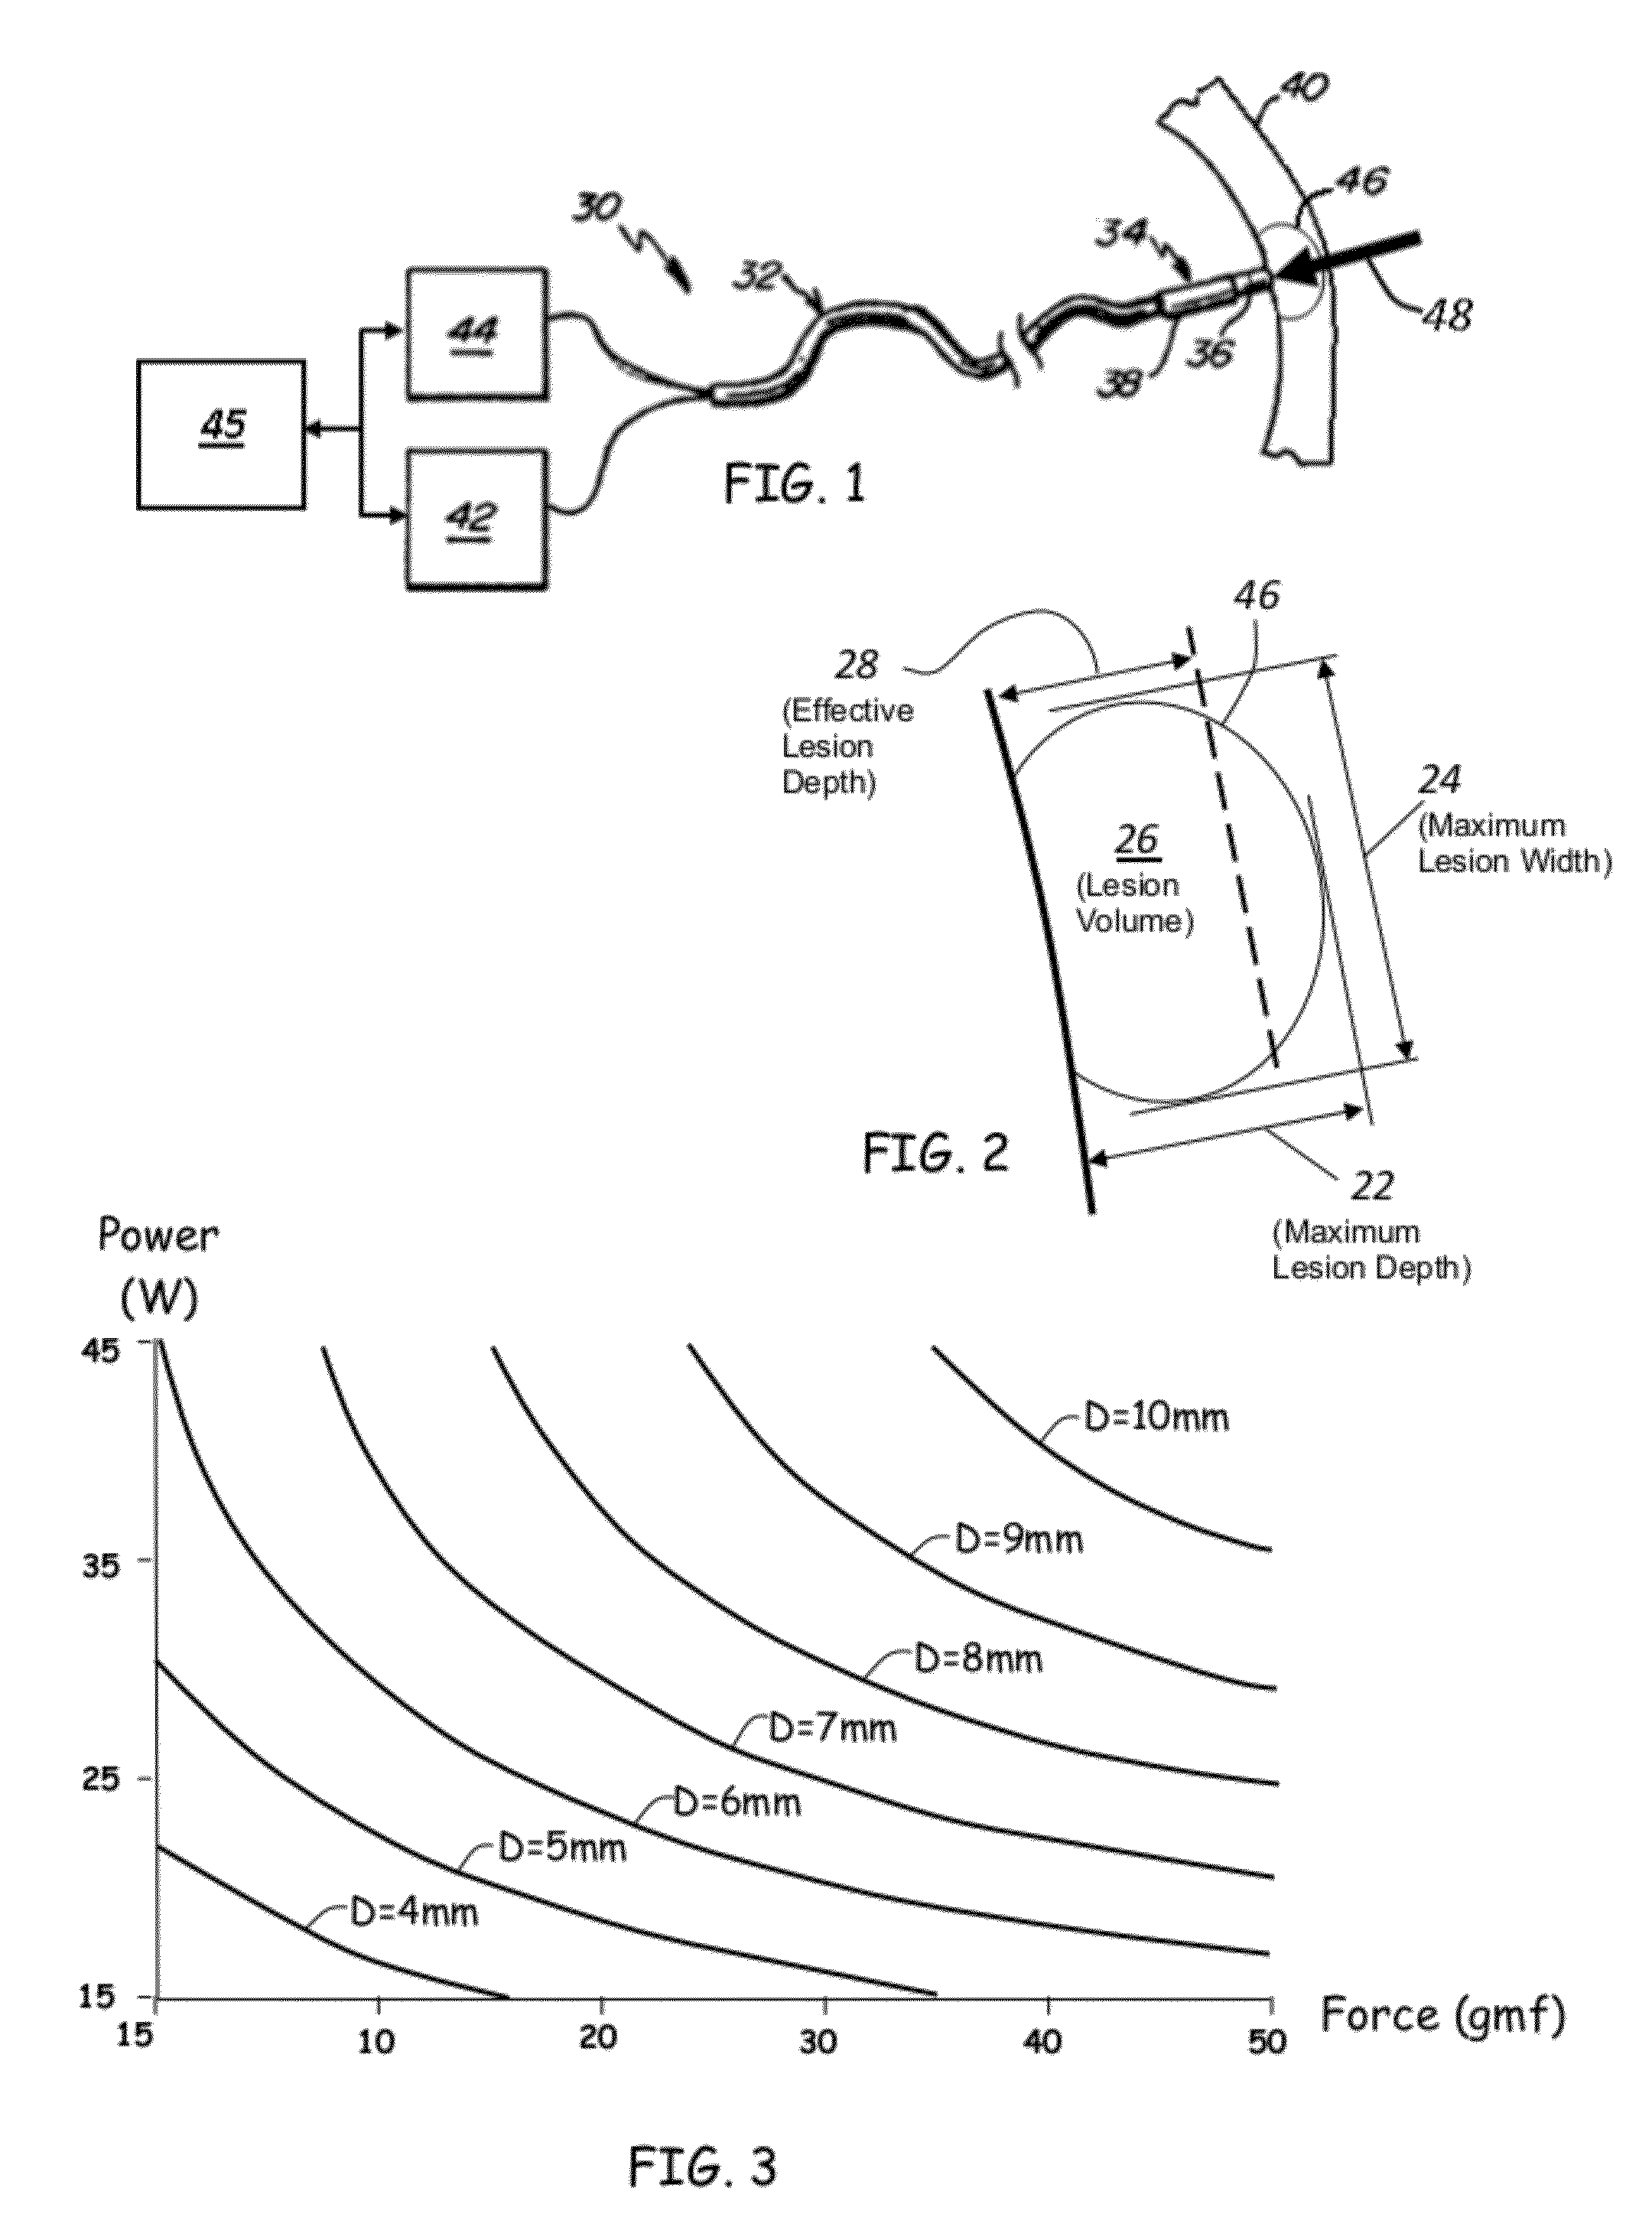 Prediction of atrial wall electrical reconnection based on contact force measured during RF ablation